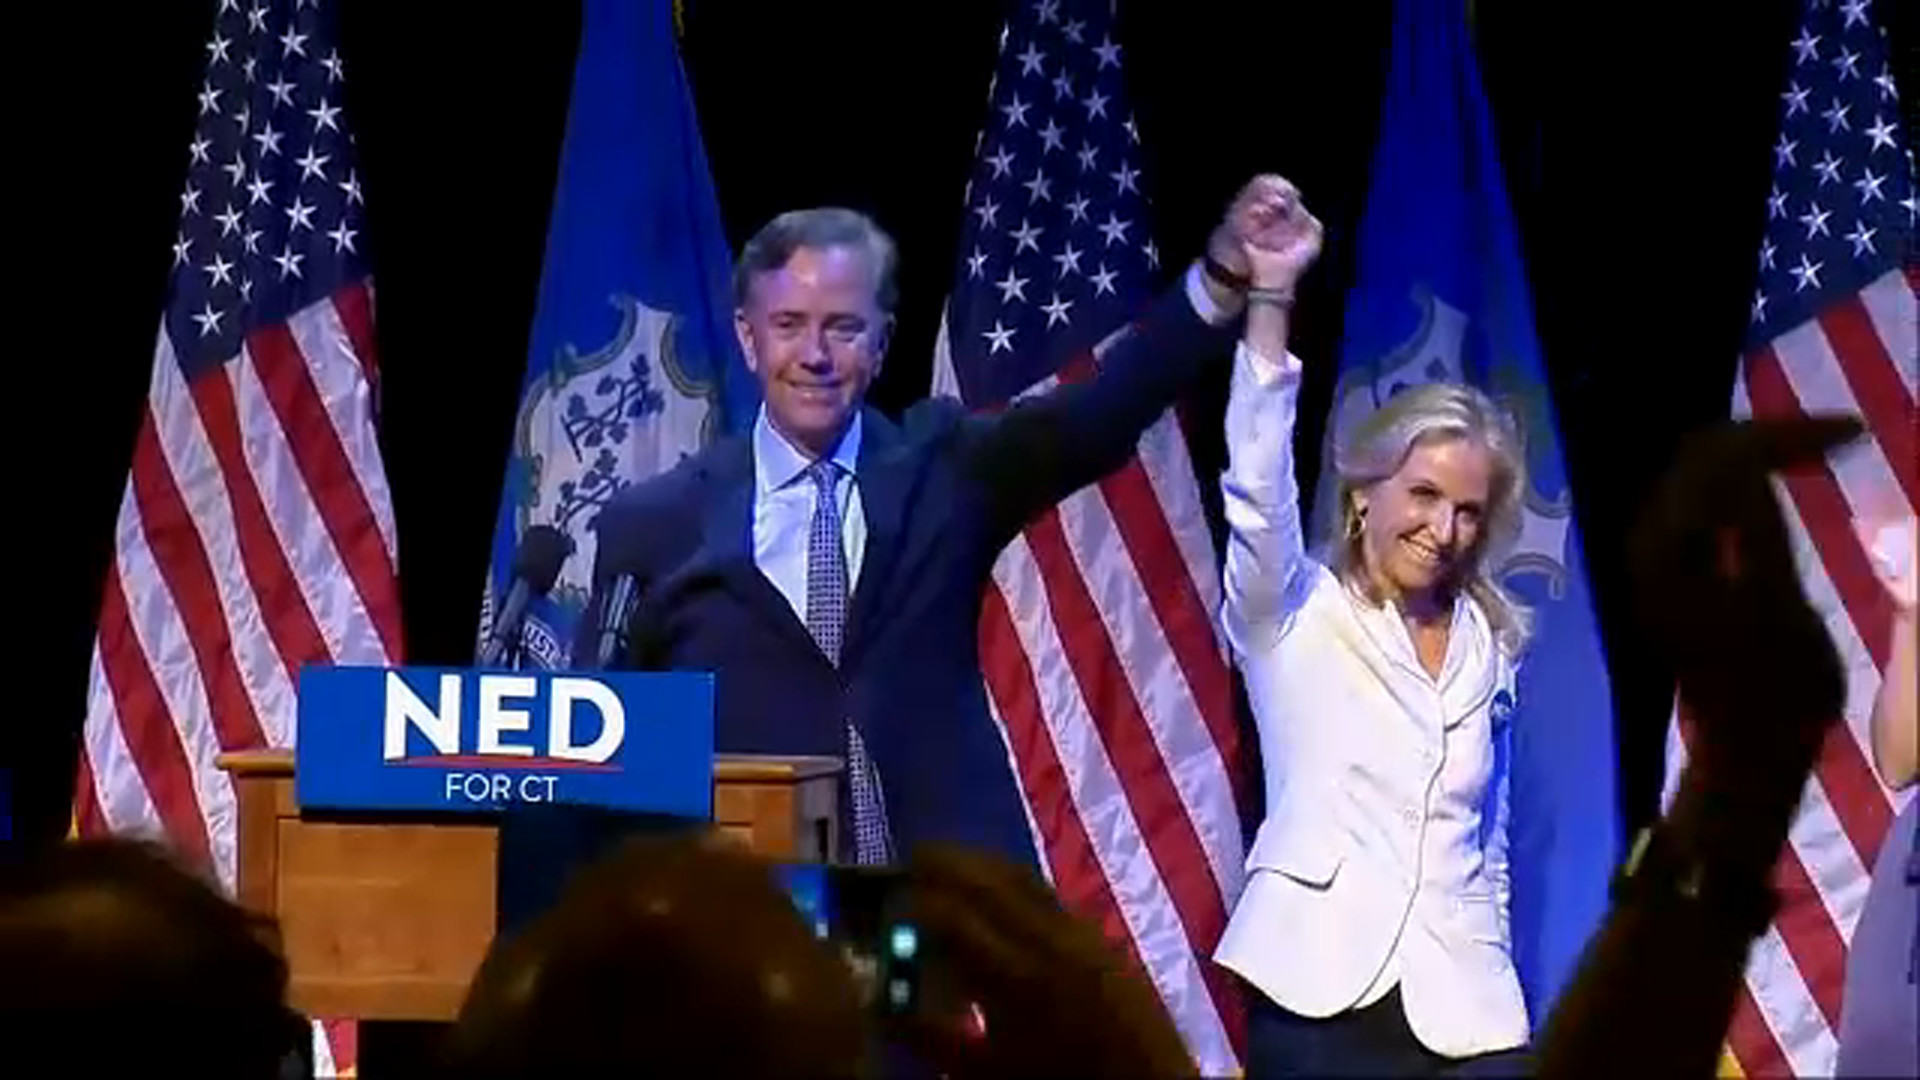 1920x1080 Election day 2018: Democrat Ned Lamont elected next governor of Connecticut